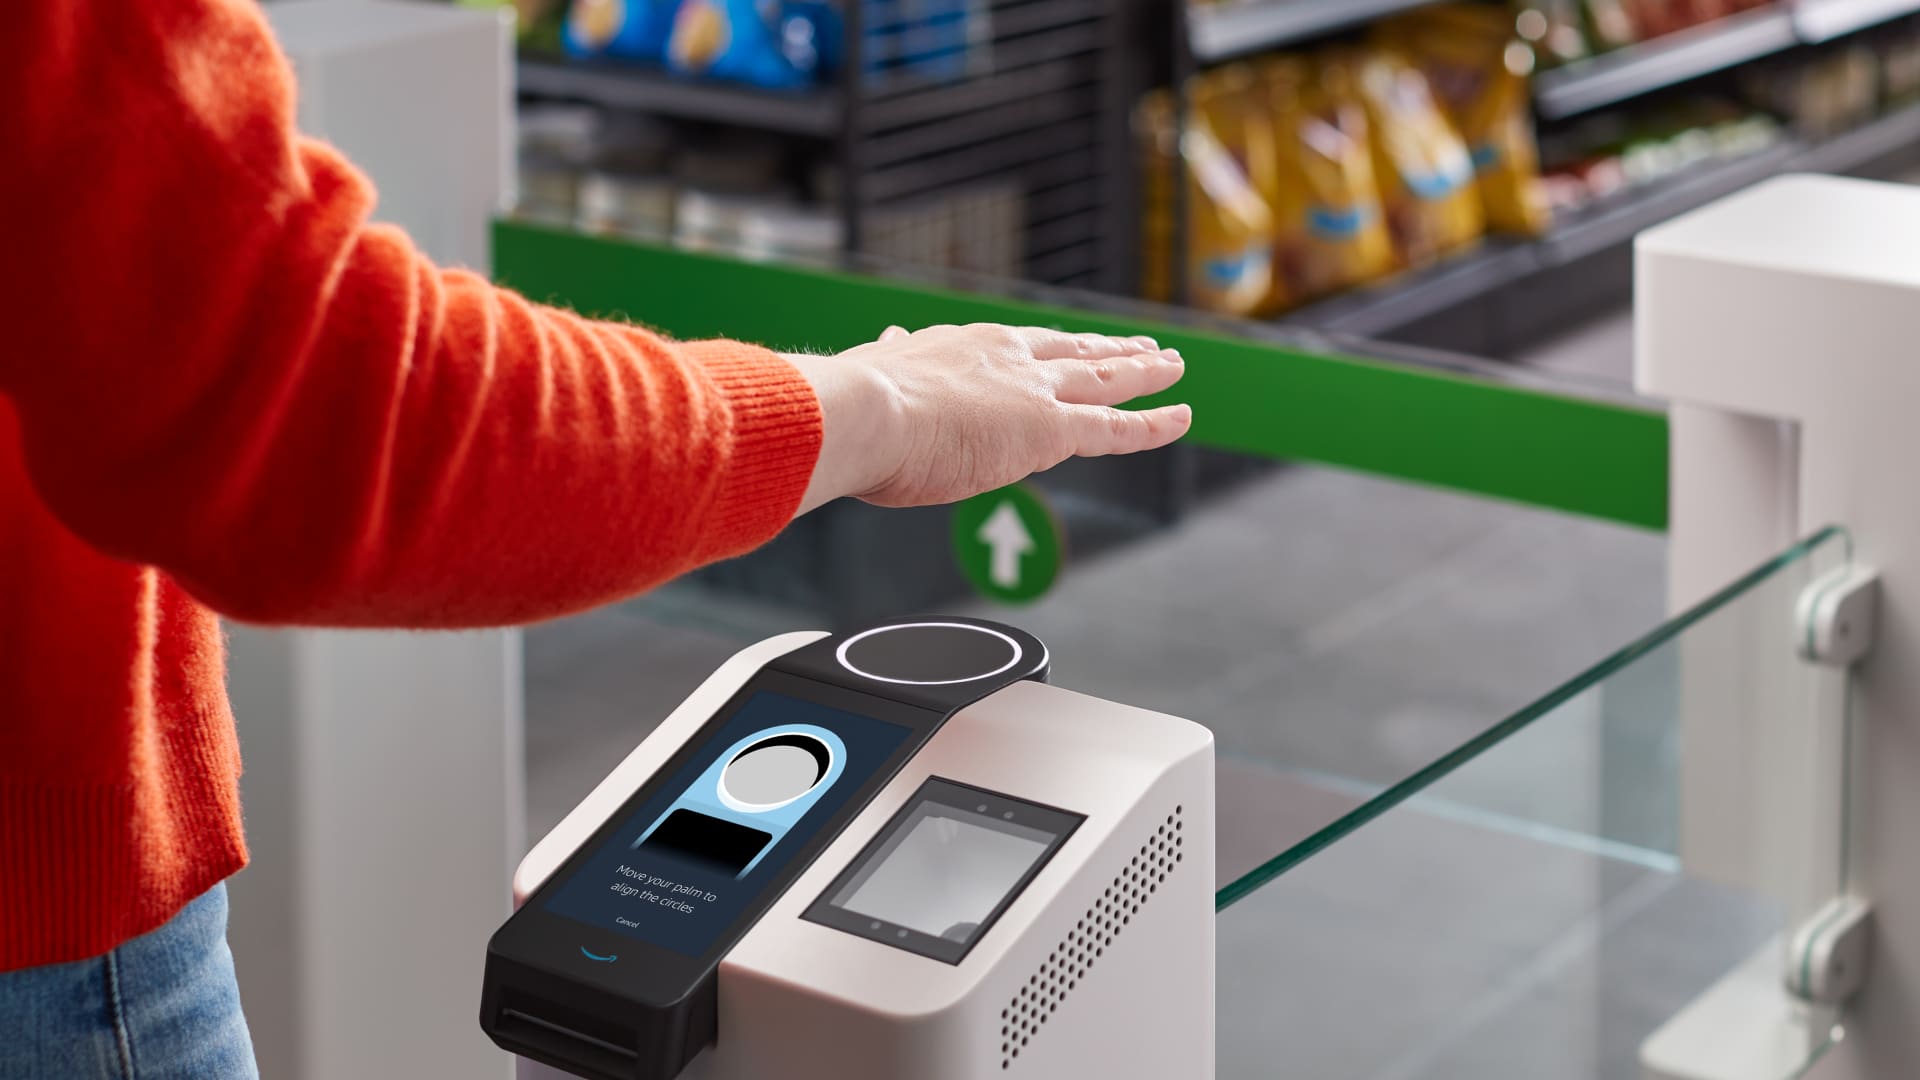 Amazon lets users buy alcohol with its palm-scanning payment system